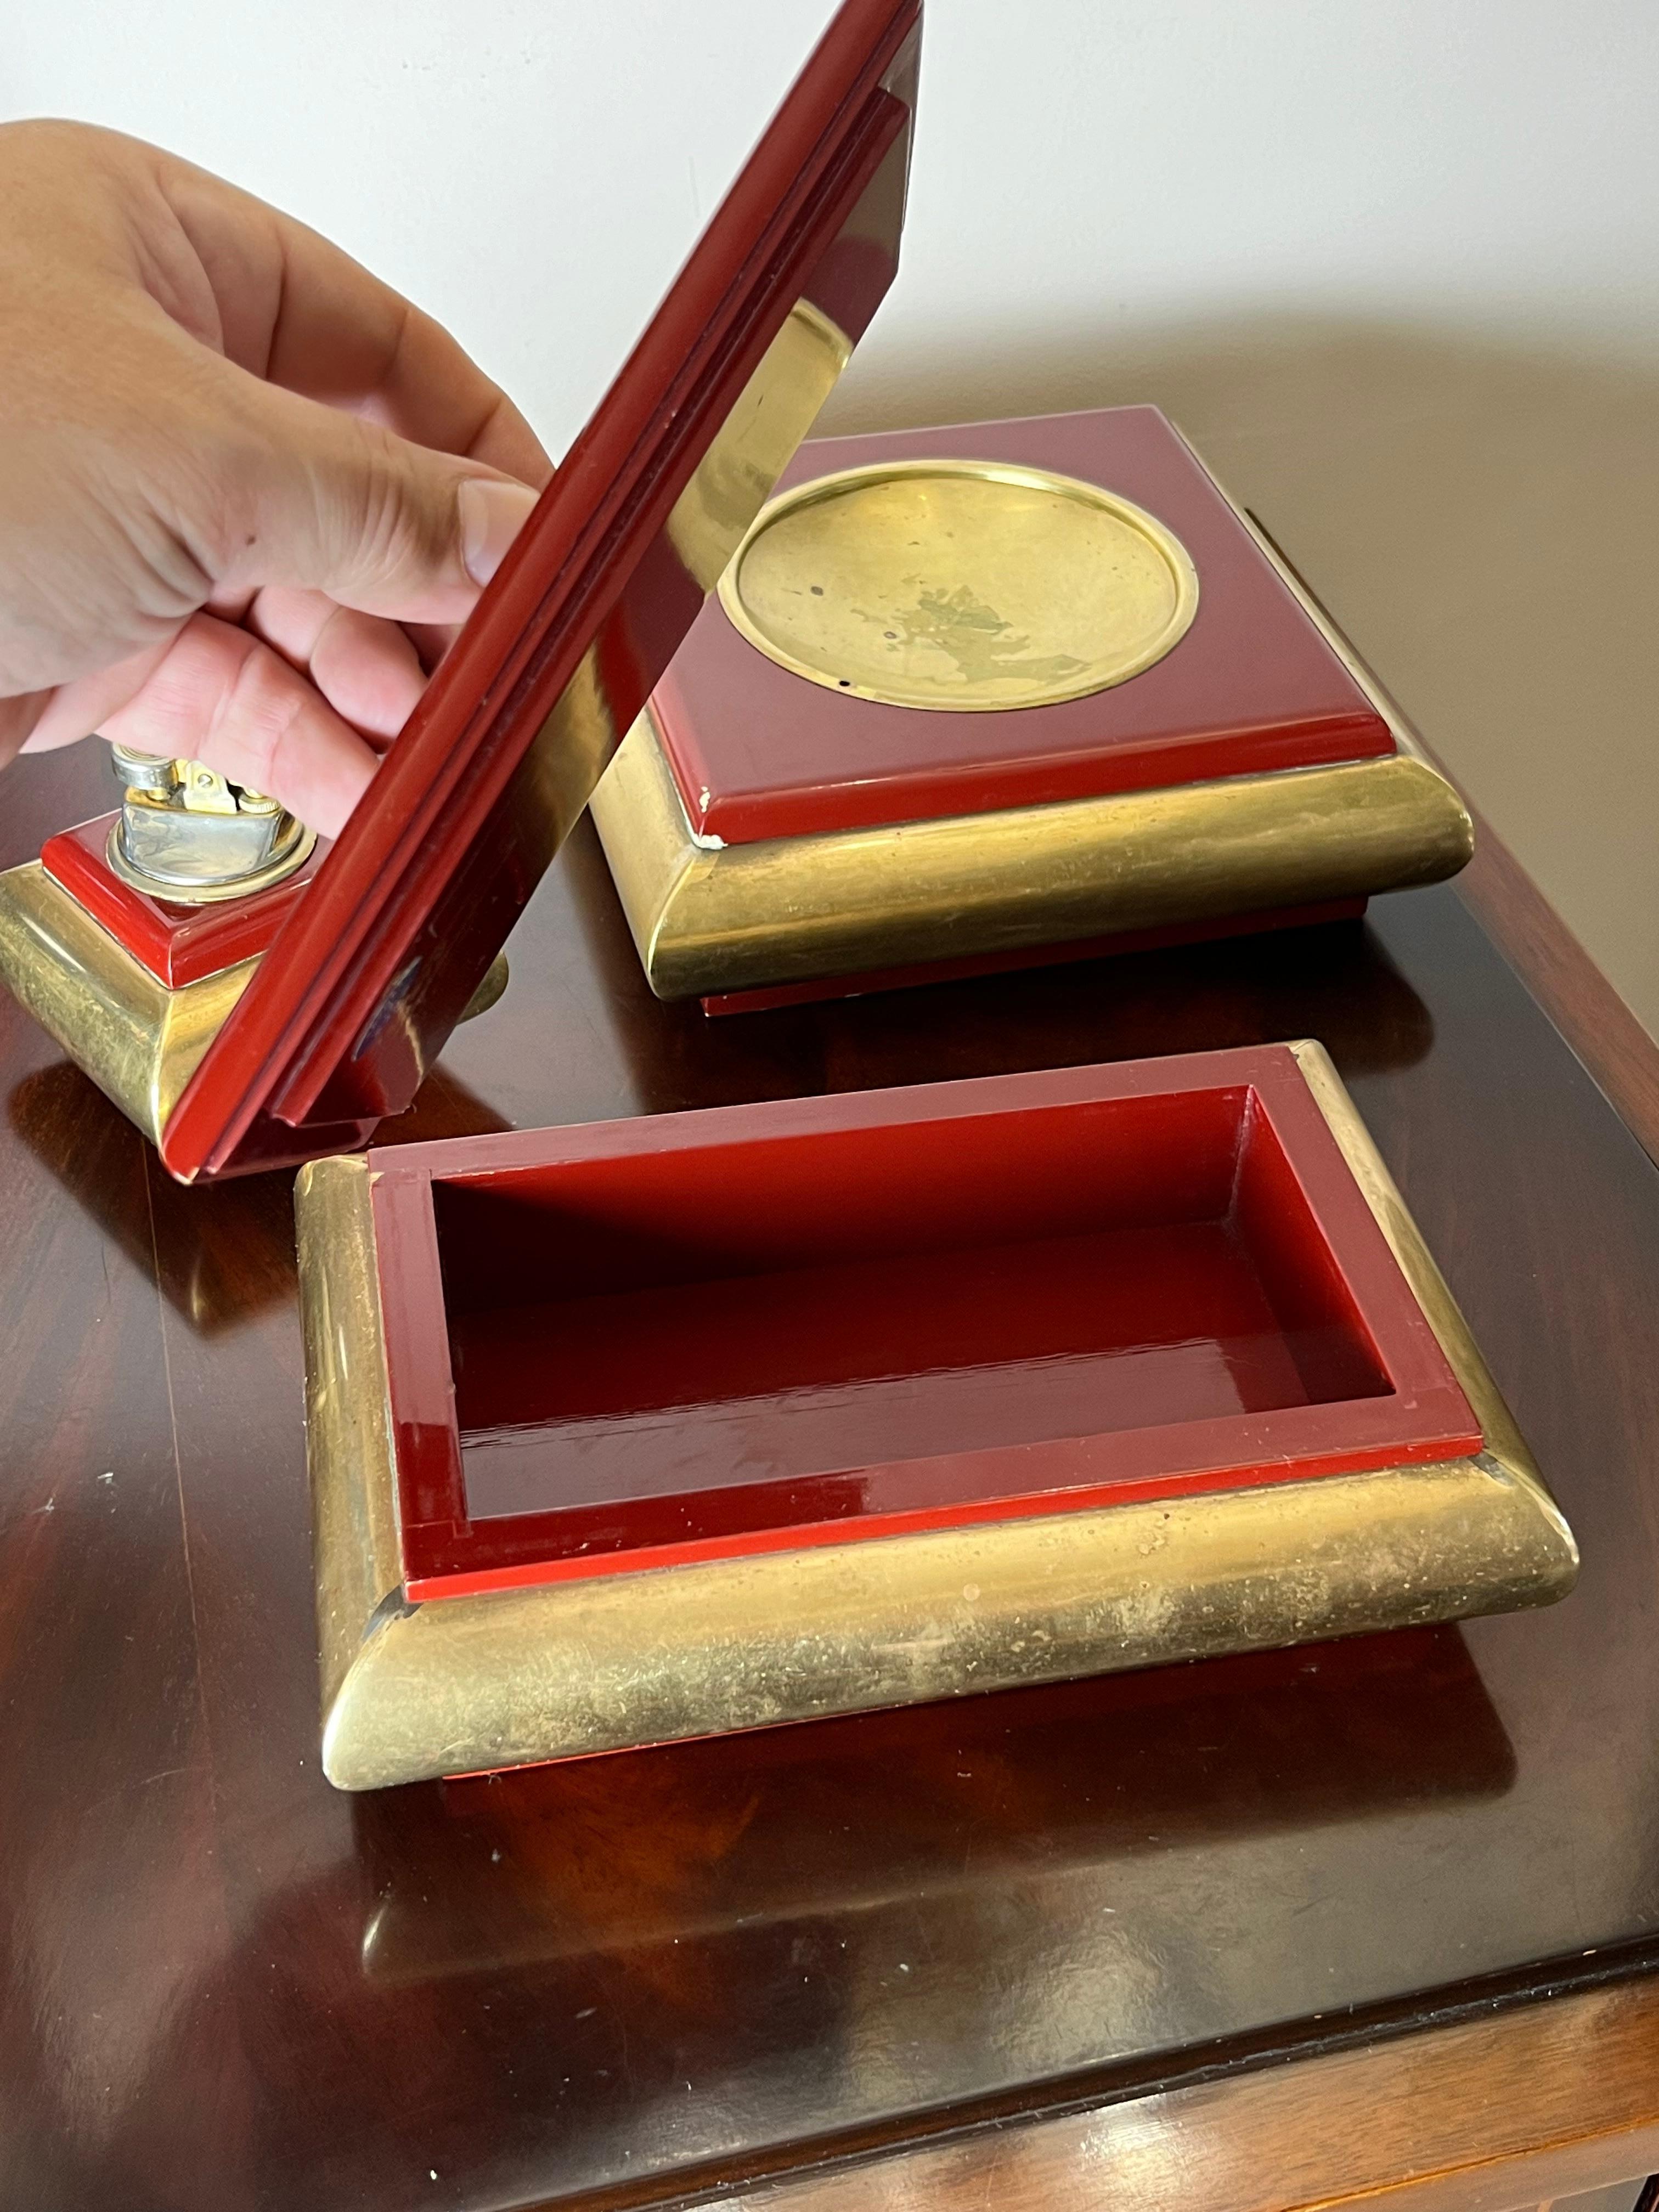 3-piece smoking set in brass and enamelled wood, made in Italy, 1970s
Consisting of lighter, ashtray and cigar box.
The ashtray measures 21 x 21 x 7 cm; The box measures 23 cm x 14.5 cm x 8 cm; The lighter measures 9 cm x 9 cm x 9 cm.
Signs of